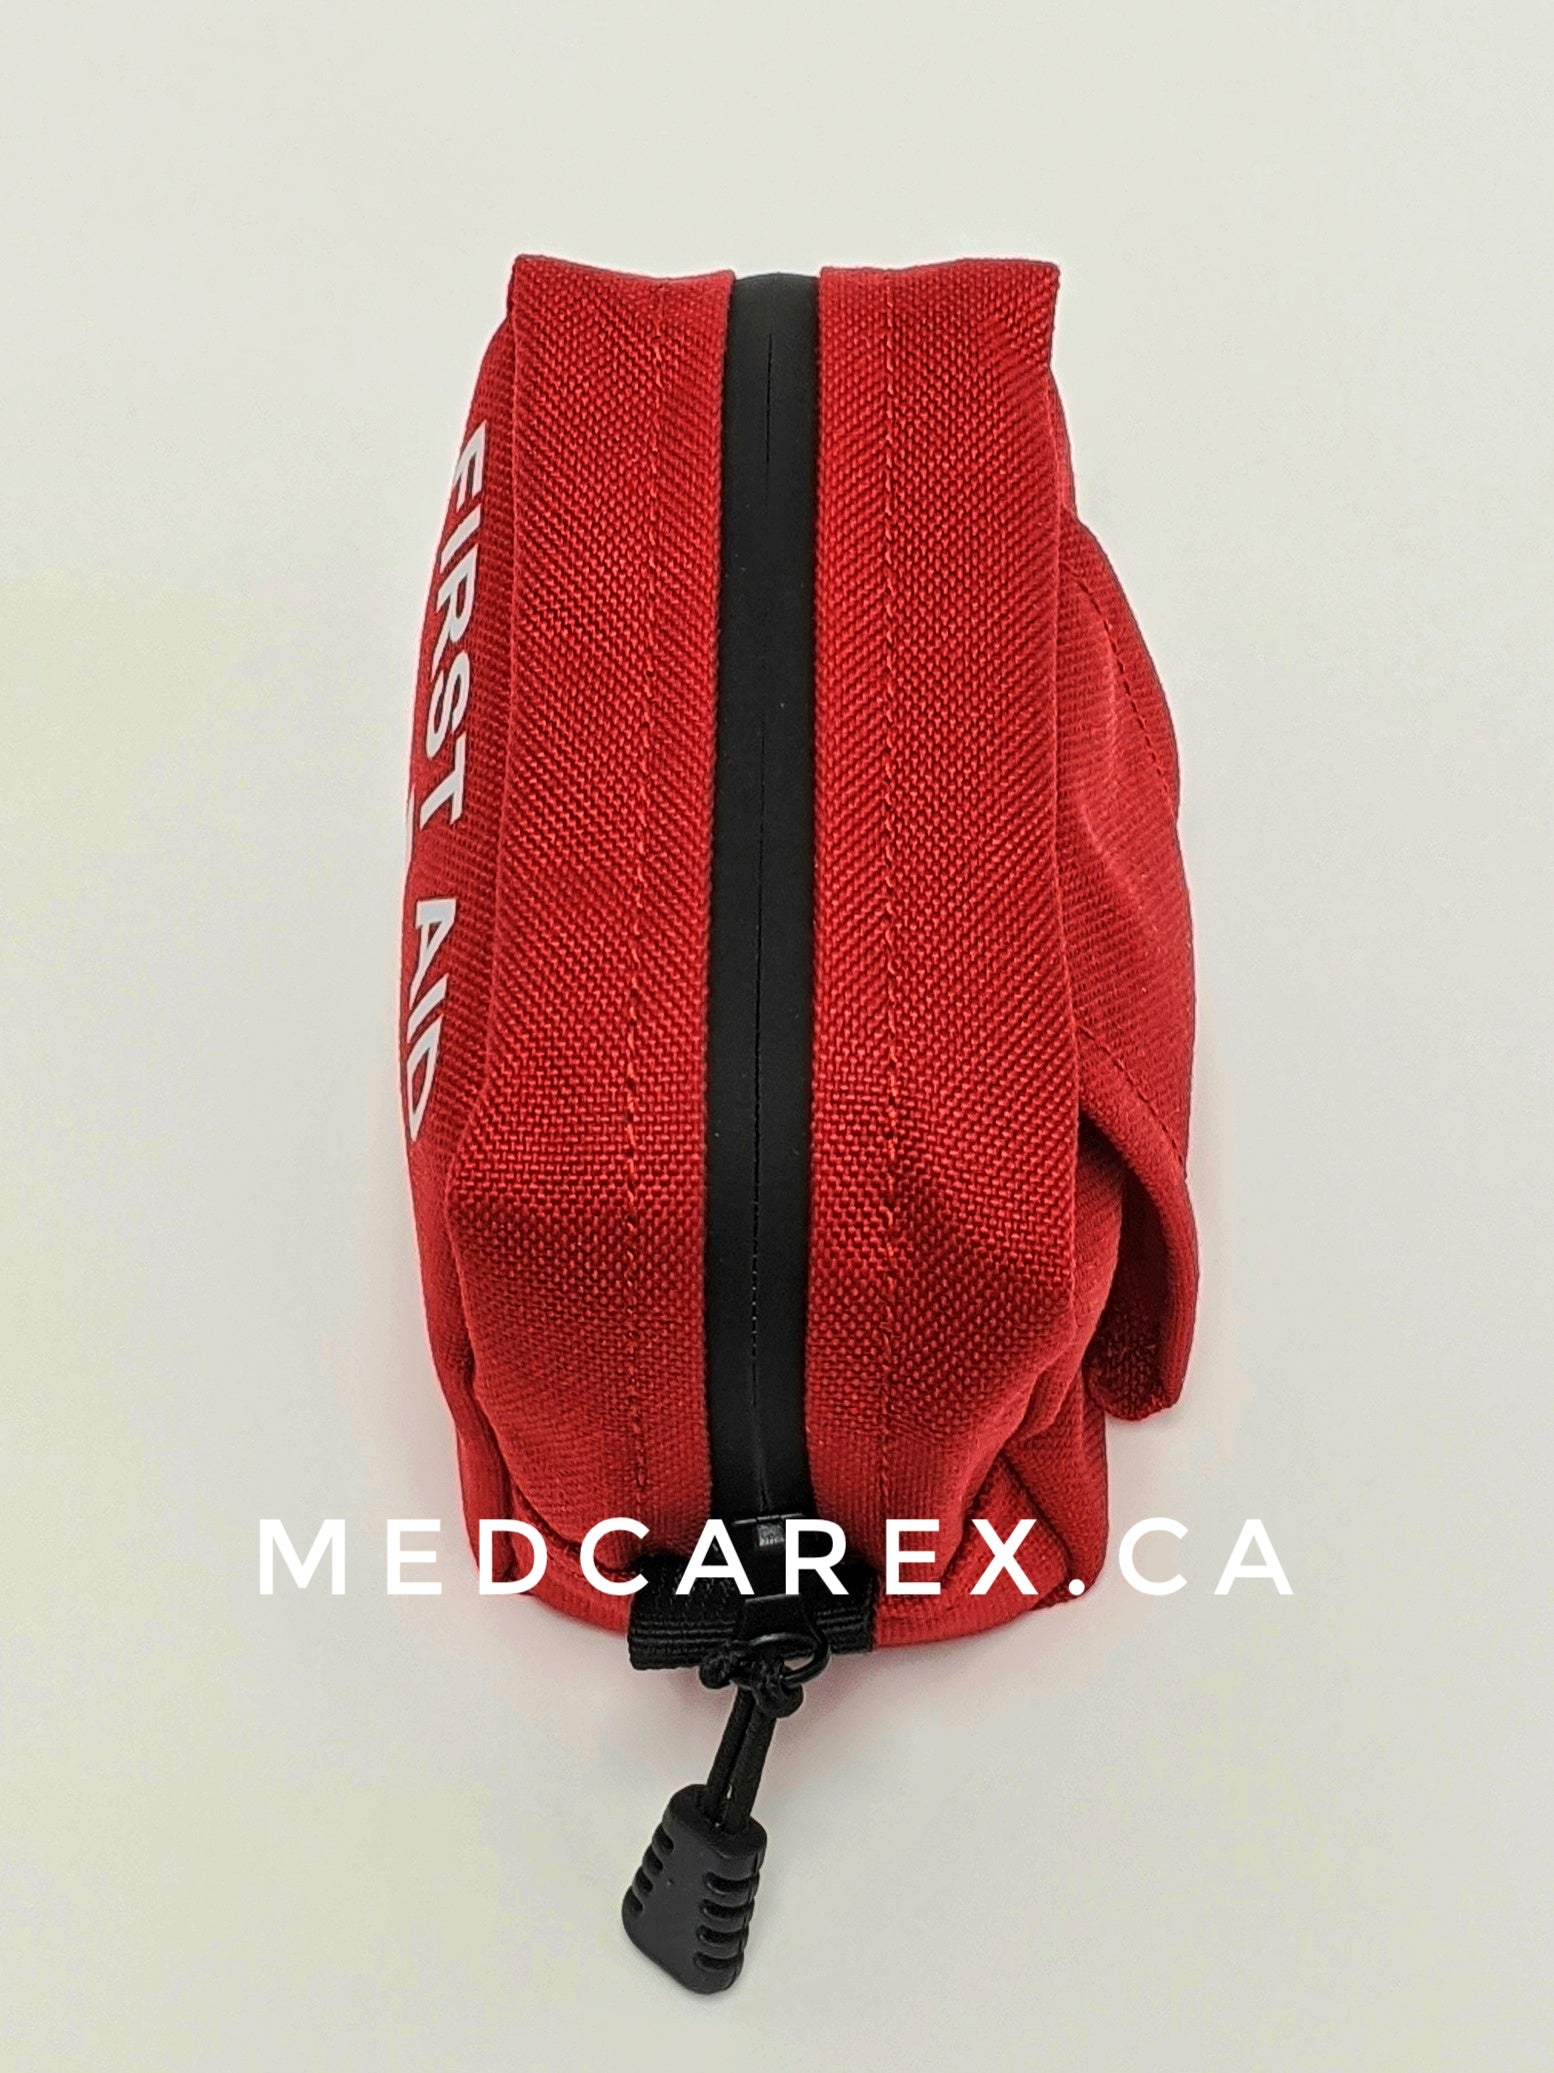 MTactical© Personal Responder First Aid Kit as used by Provincial agencies in Canada